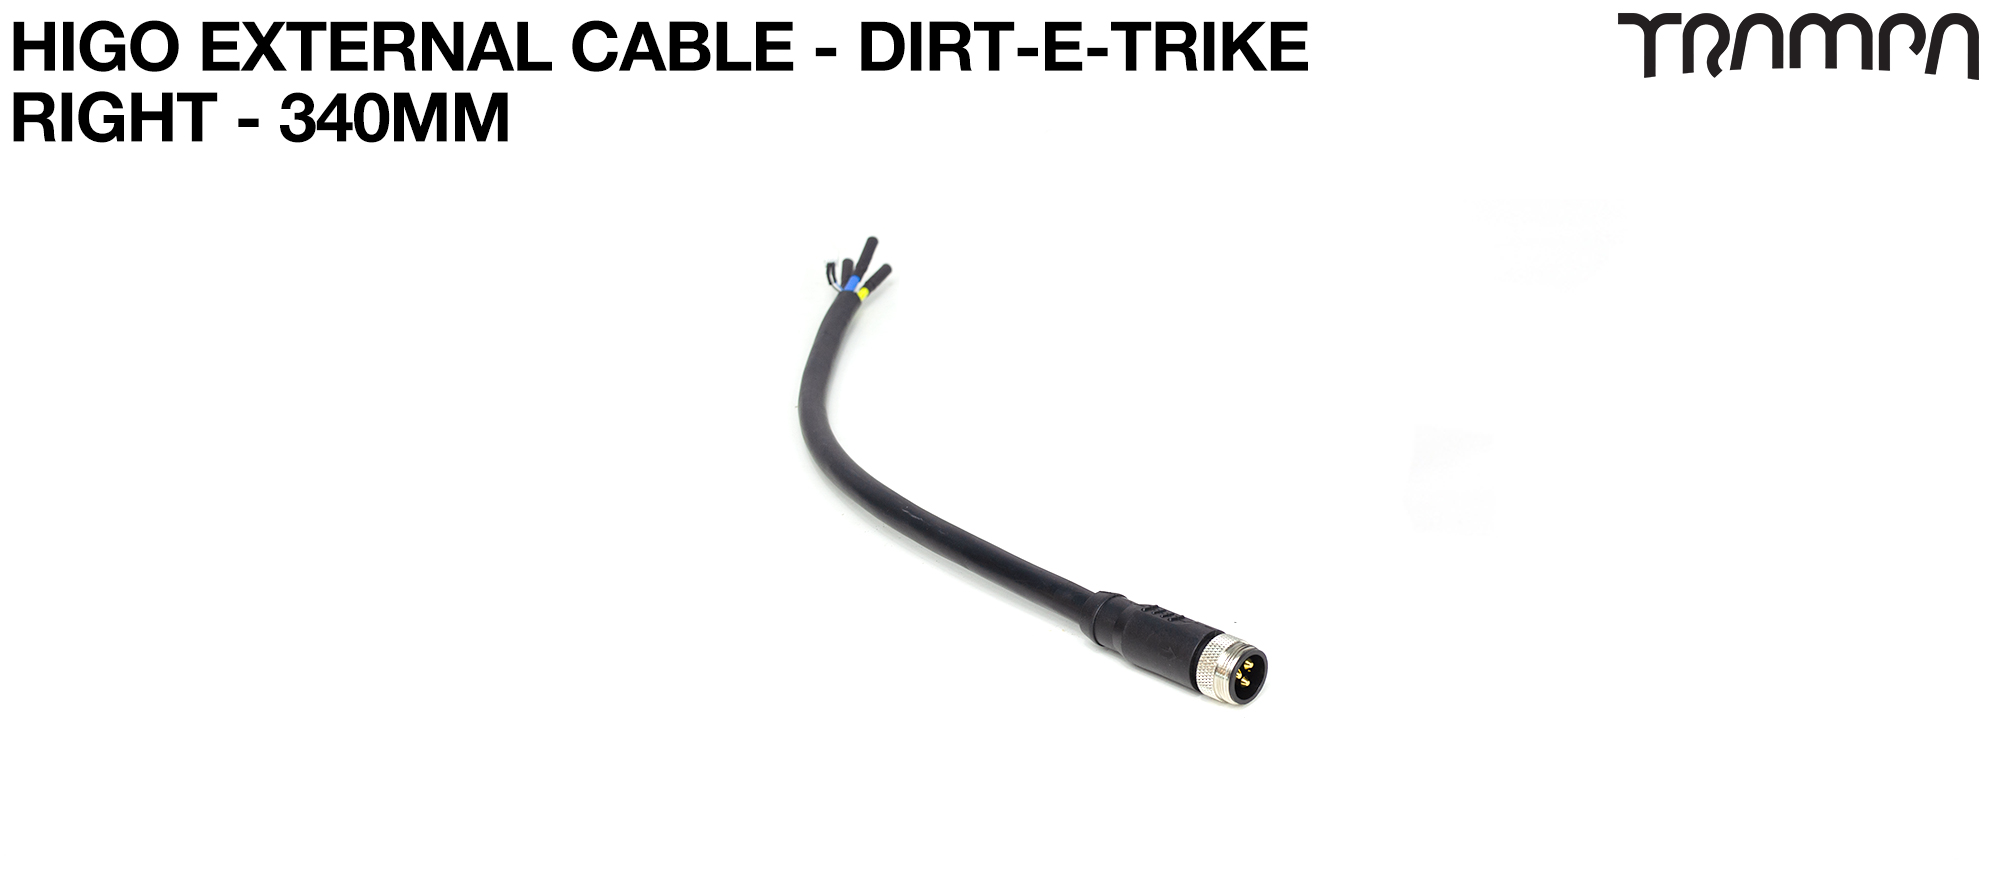 1x External HIGO Drift-E-Trike Motor Cable with PLUGS - RIGHT 340mm